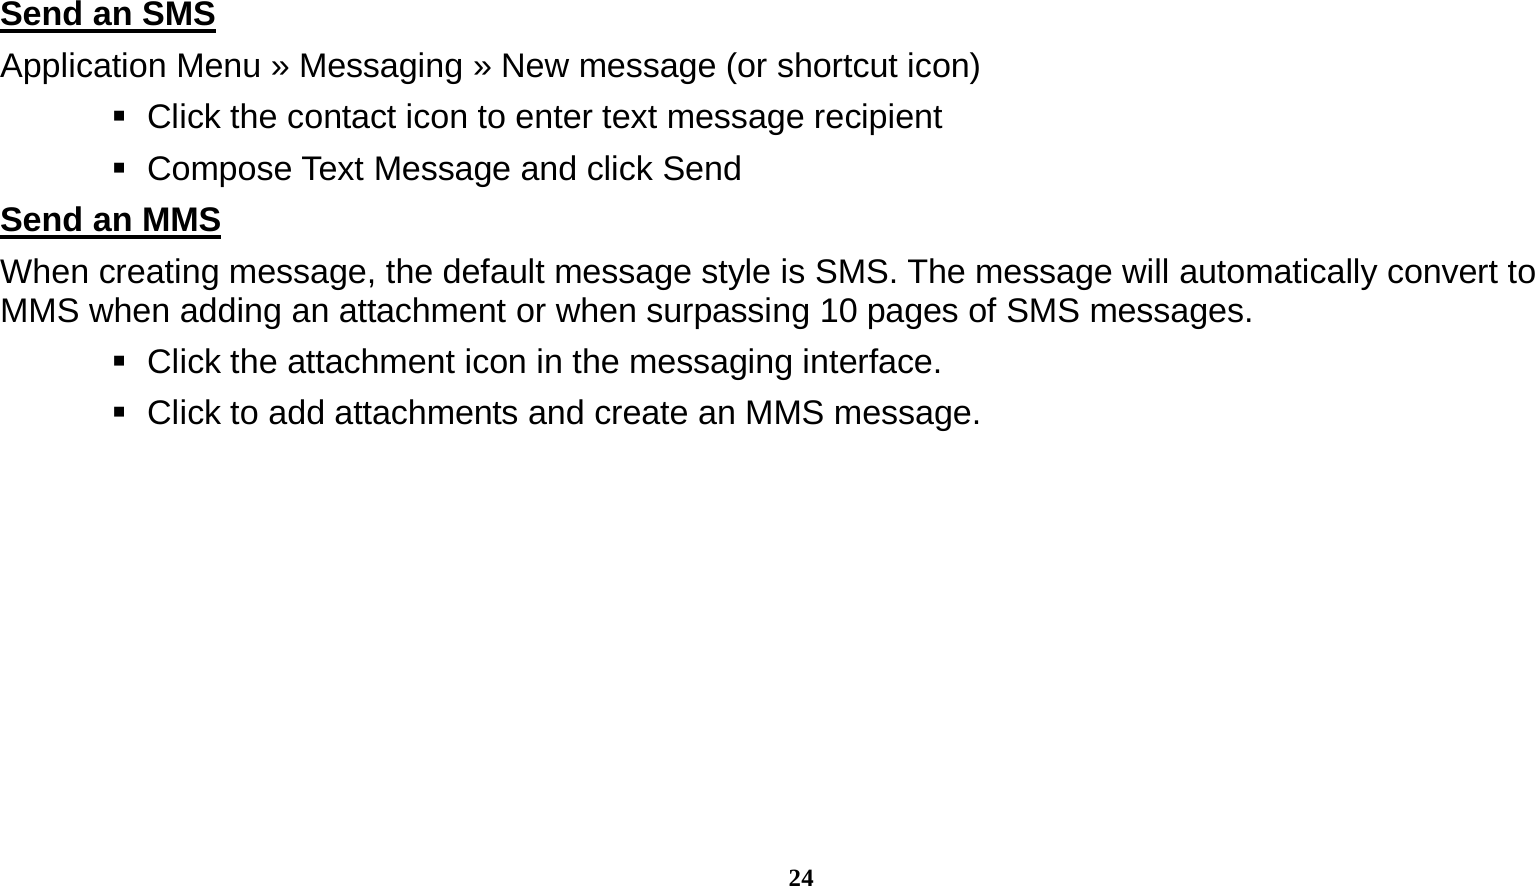  24  Send an SMS                                                                                      Application Menu » Messaging » New message (or shortcut icon)      Click the contact icon to enter text message recipient      Compose Text Message and click Send Send an MMS                                                                                      When creating message, the default message style is SMS. The message will automatically convert to MMS when adding an attachment or when surpassing 10 pages of SMS messages.      Click the attachment icon in the messaging interface.    Click to add attachments and create an MMS message. 